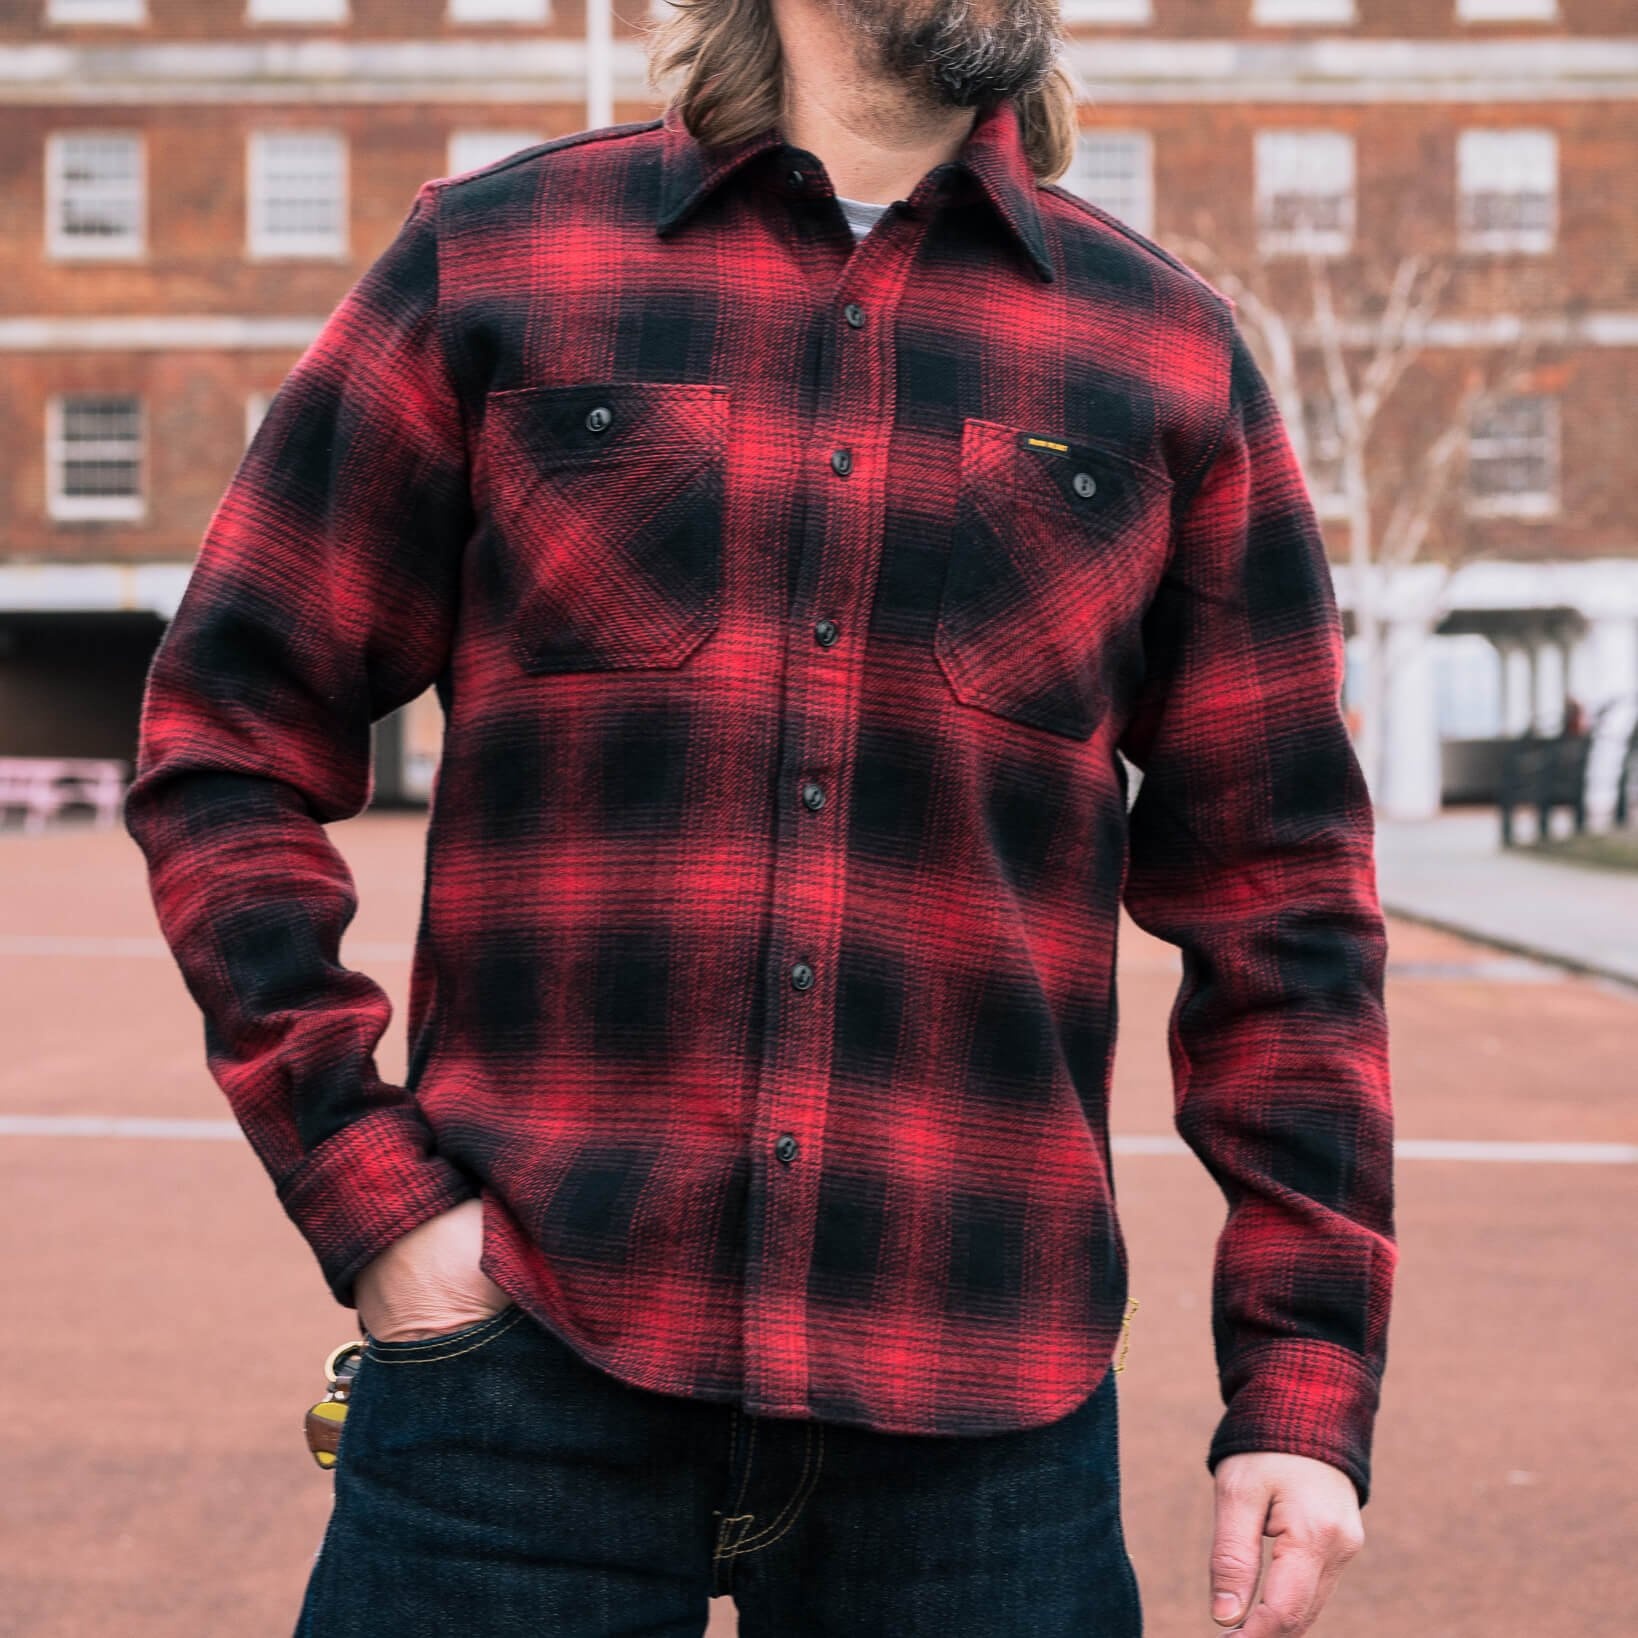 IHSH-265-RED Ultra Heavy Flannel Ombré Check Work Shirt - Red/Black - 4